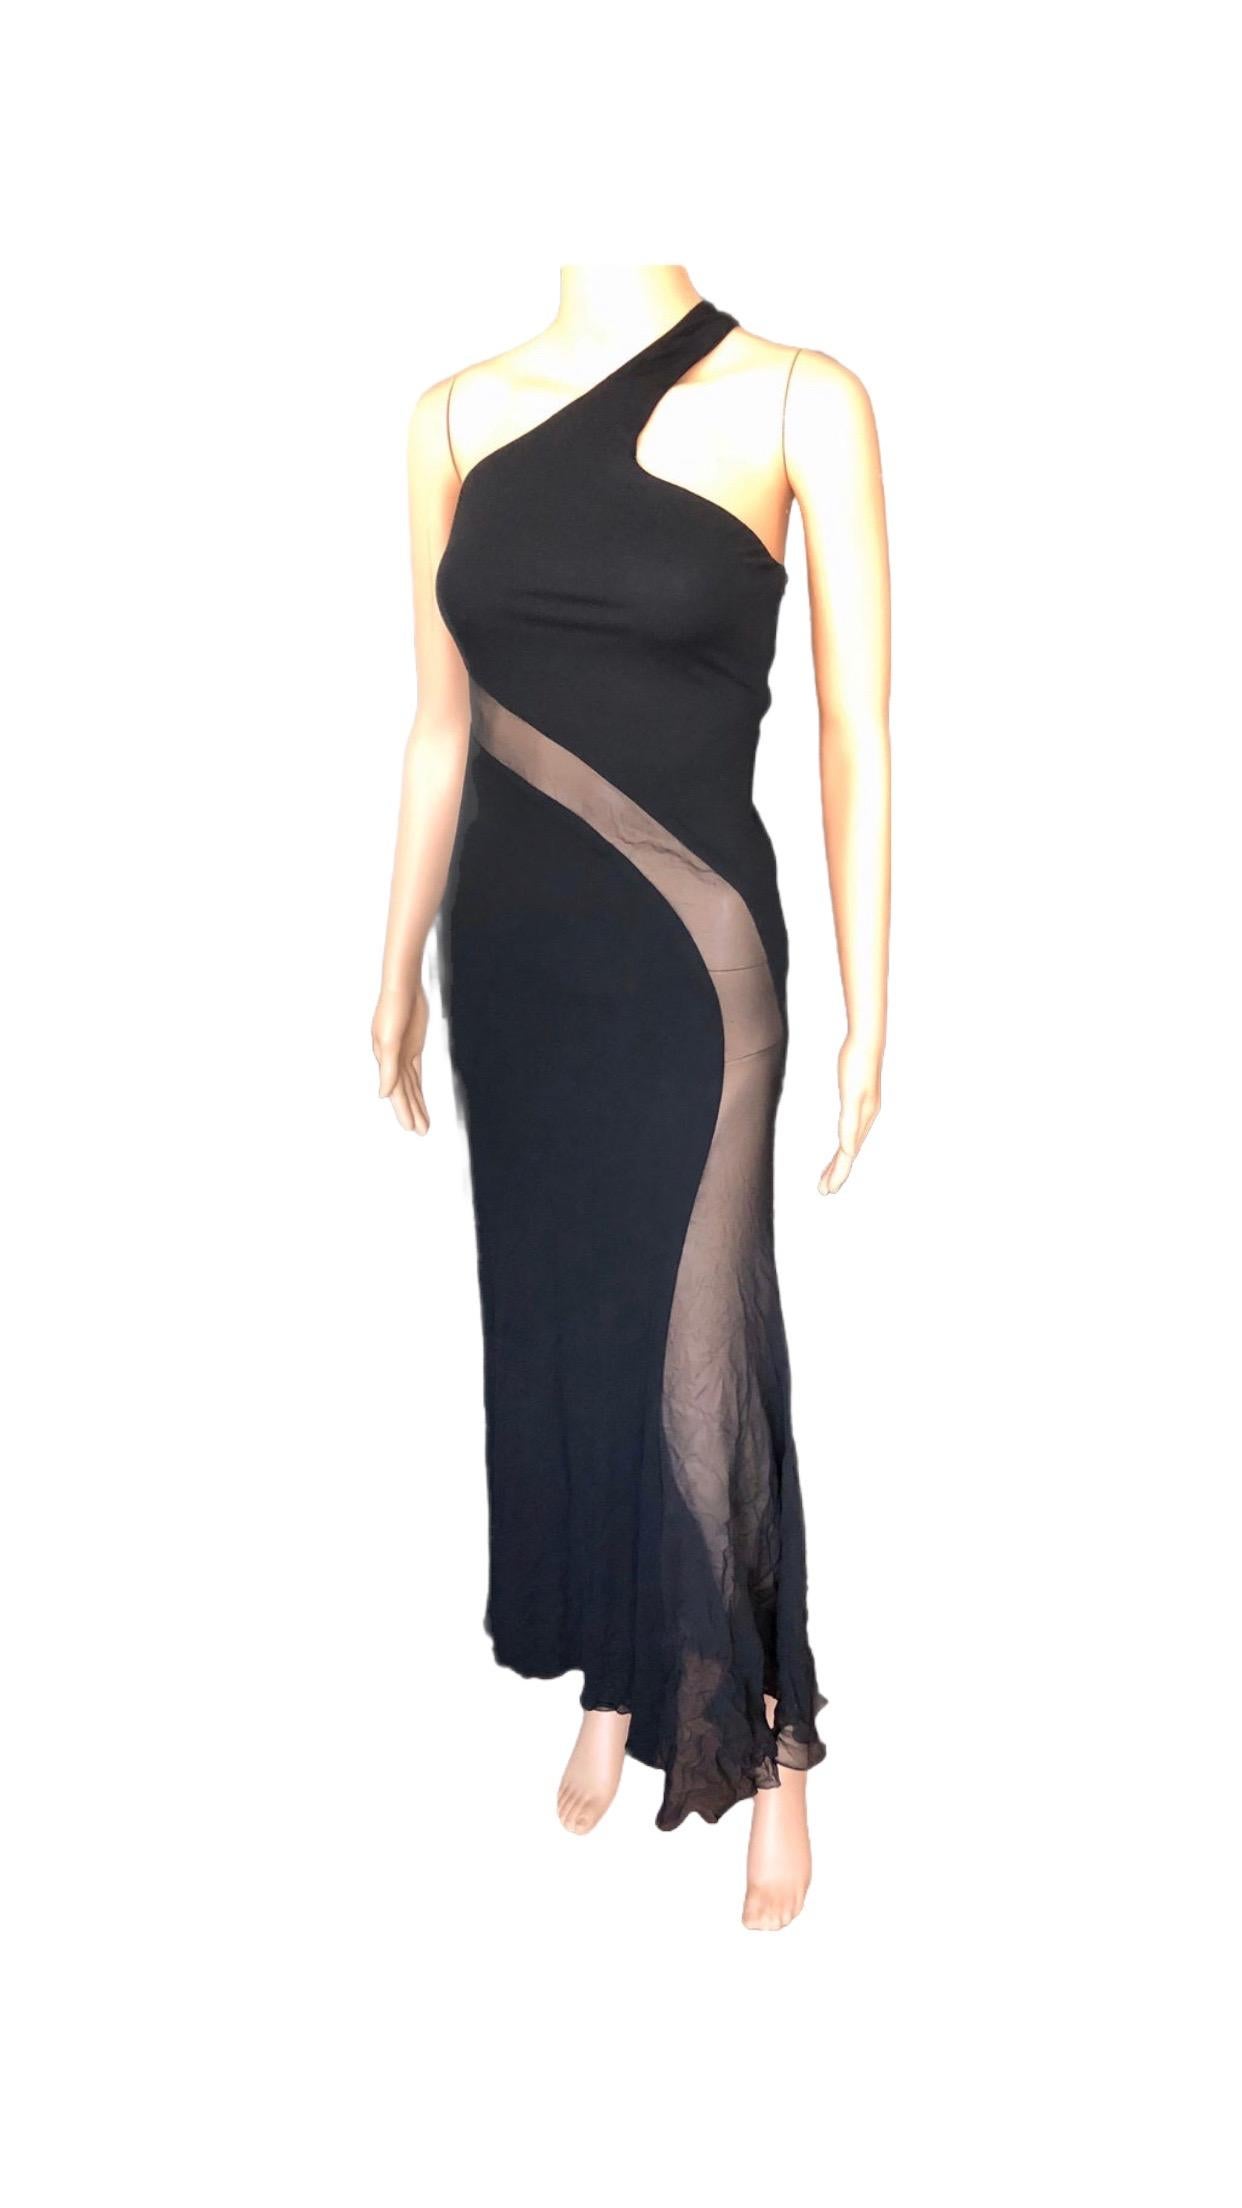 Versace Sheer Cutout Panel Black Evening Dress Gown For Sale 2